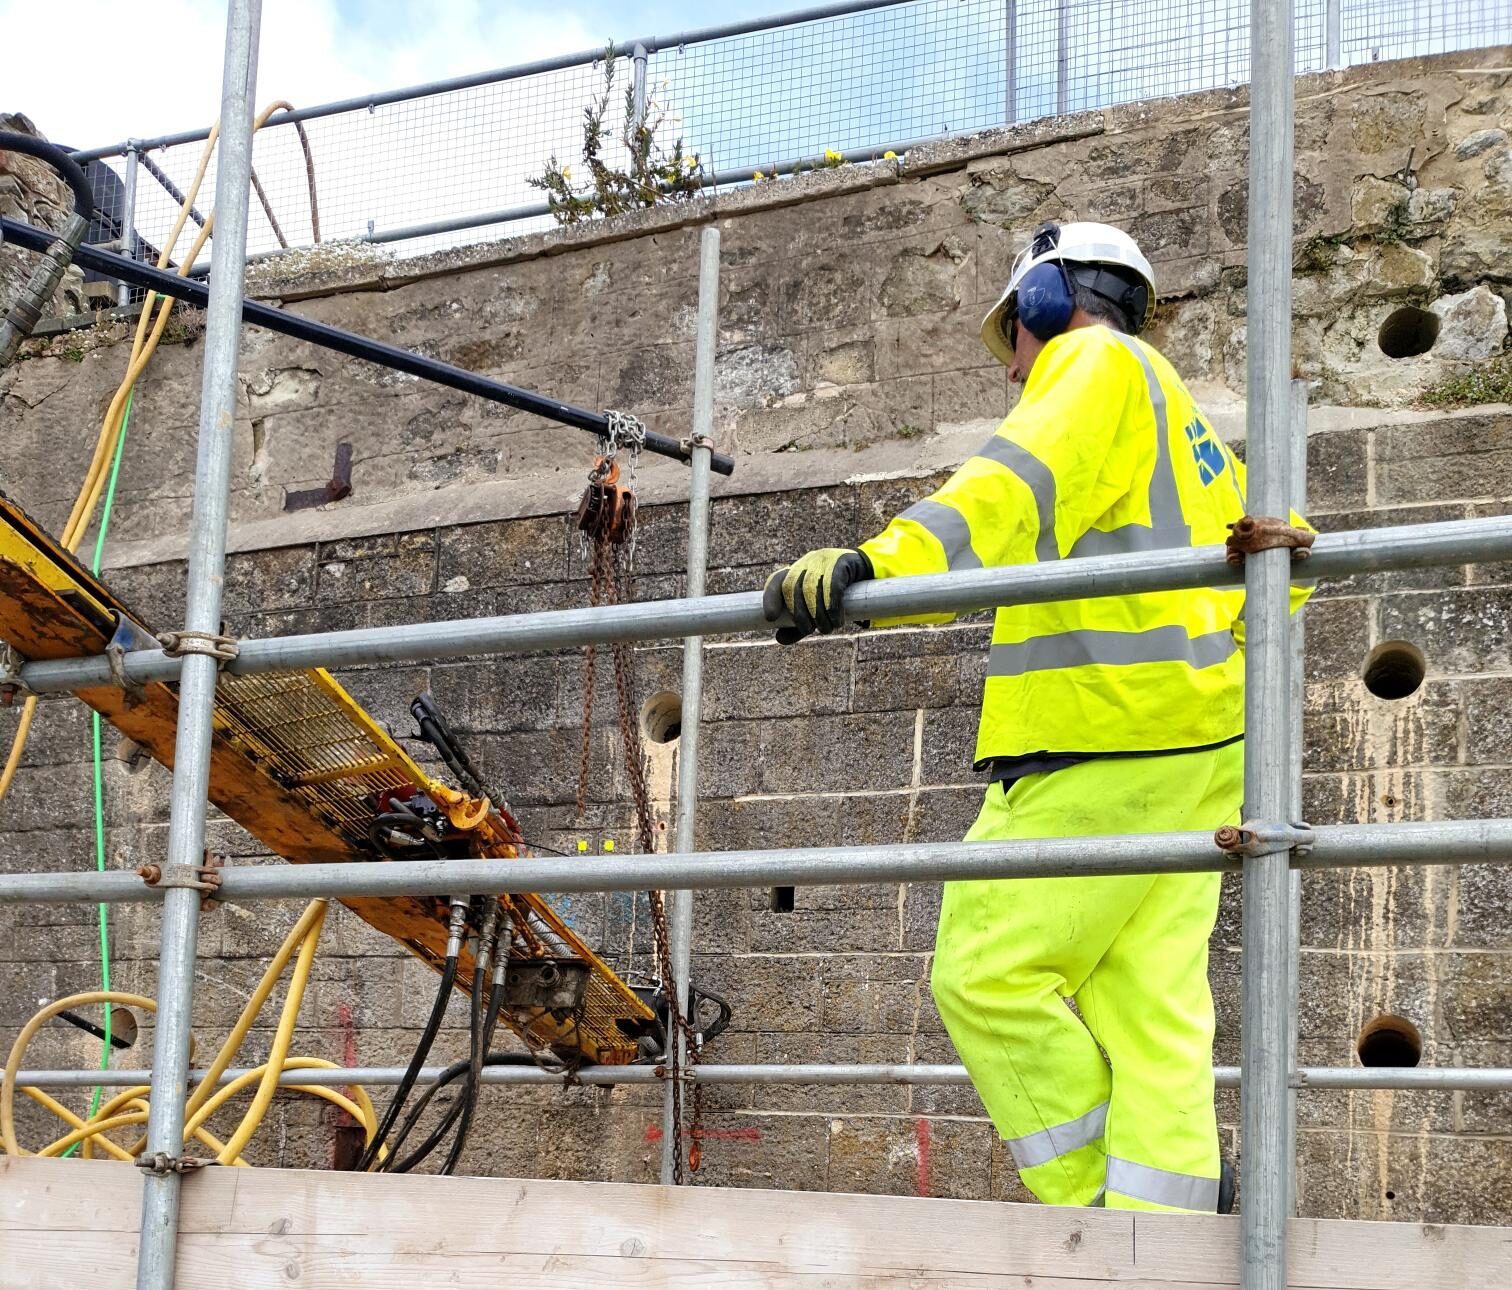 man in yellow hi visibility workwear standing on scaffolding adjacent to wall, other equipment visible in the background